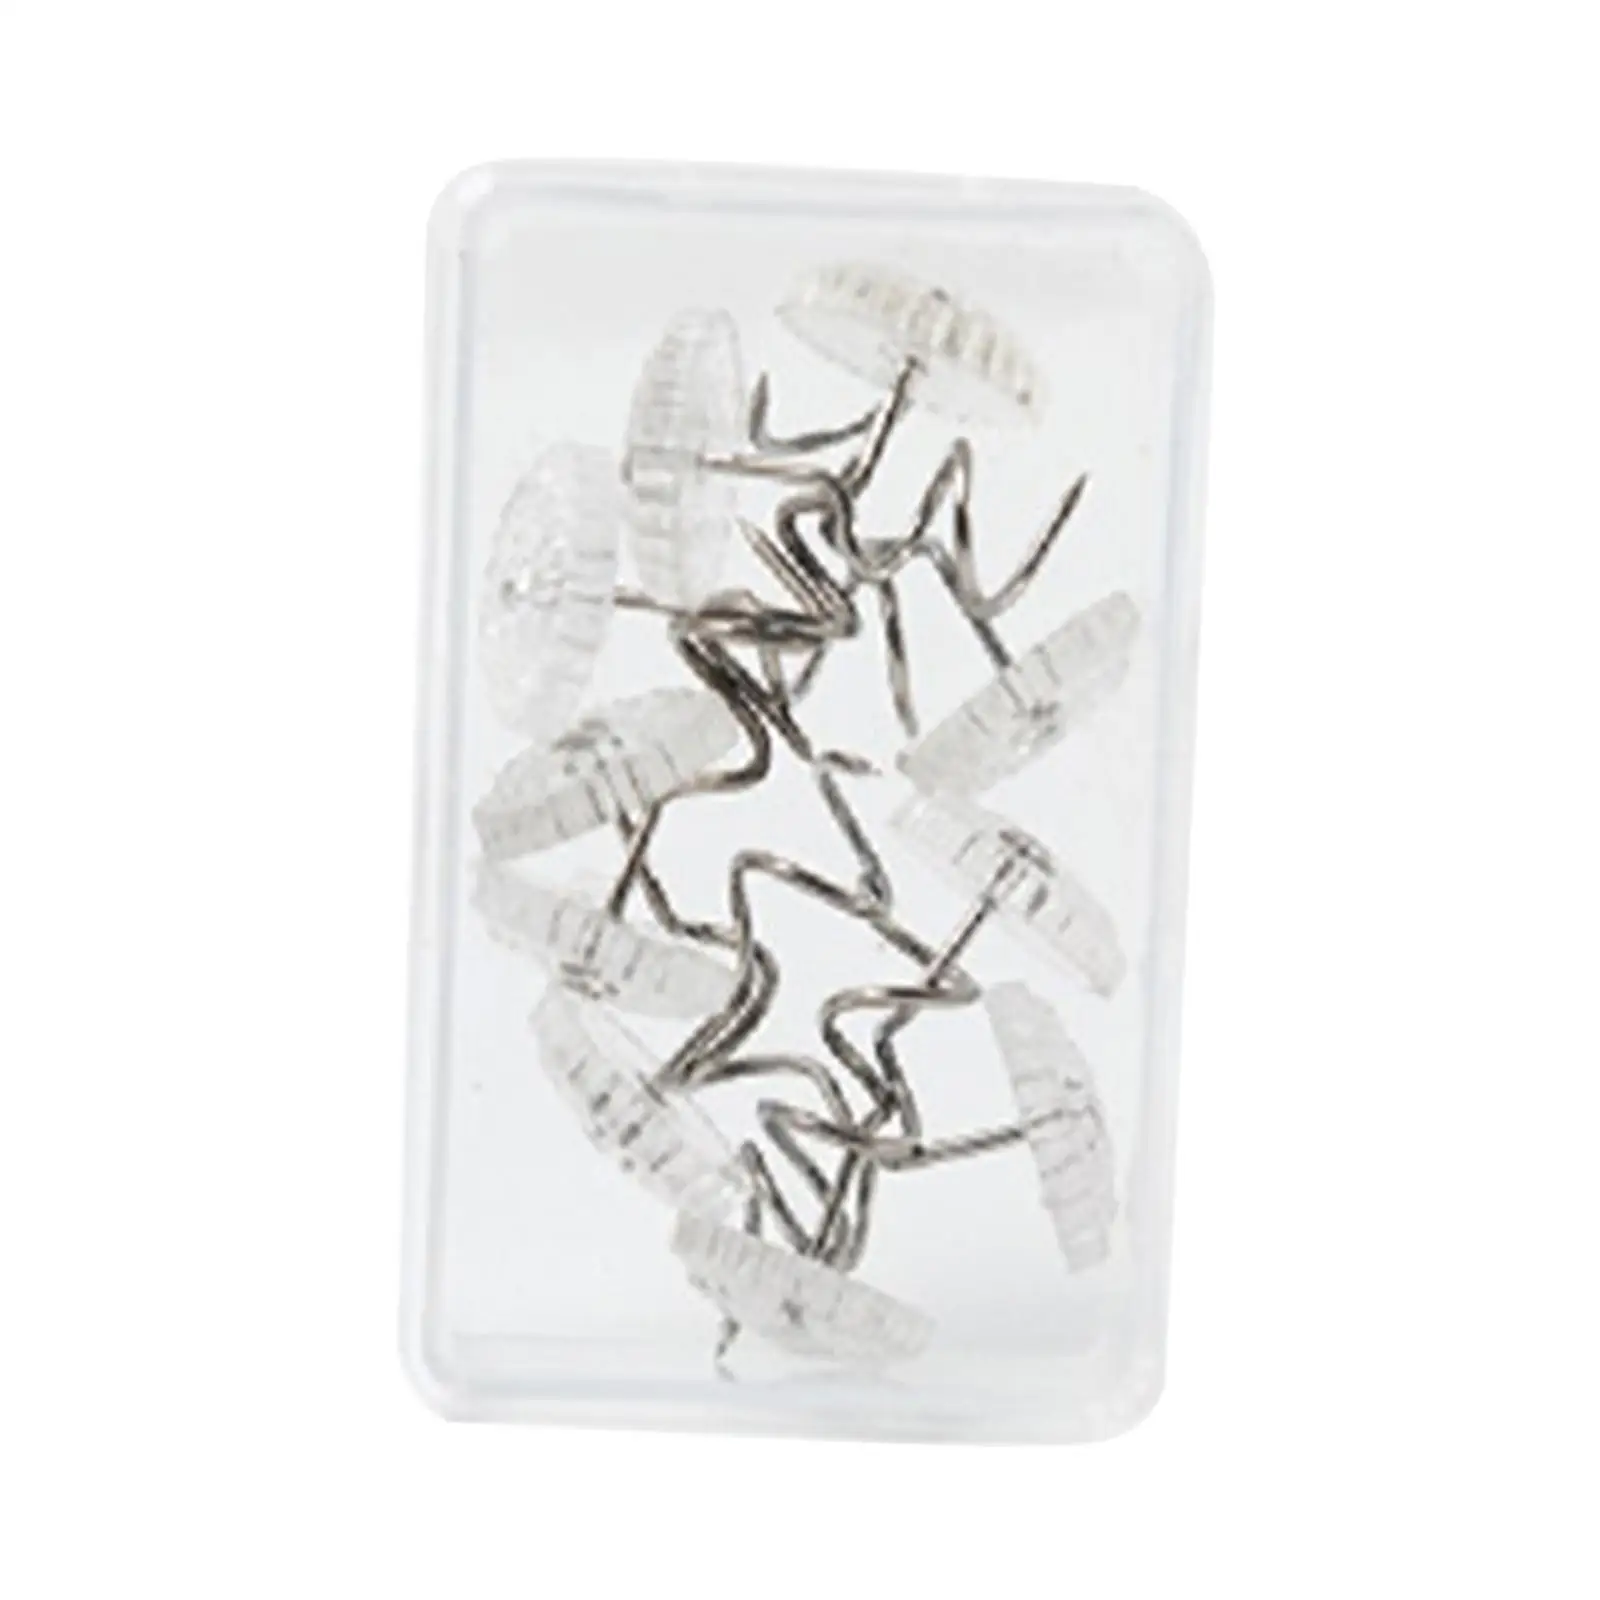 10Pcs Clear Heads Twist Pins Fixed Fastener and Storage Box Skirt Pins for Furniture Van Home Slipcovers Supplies